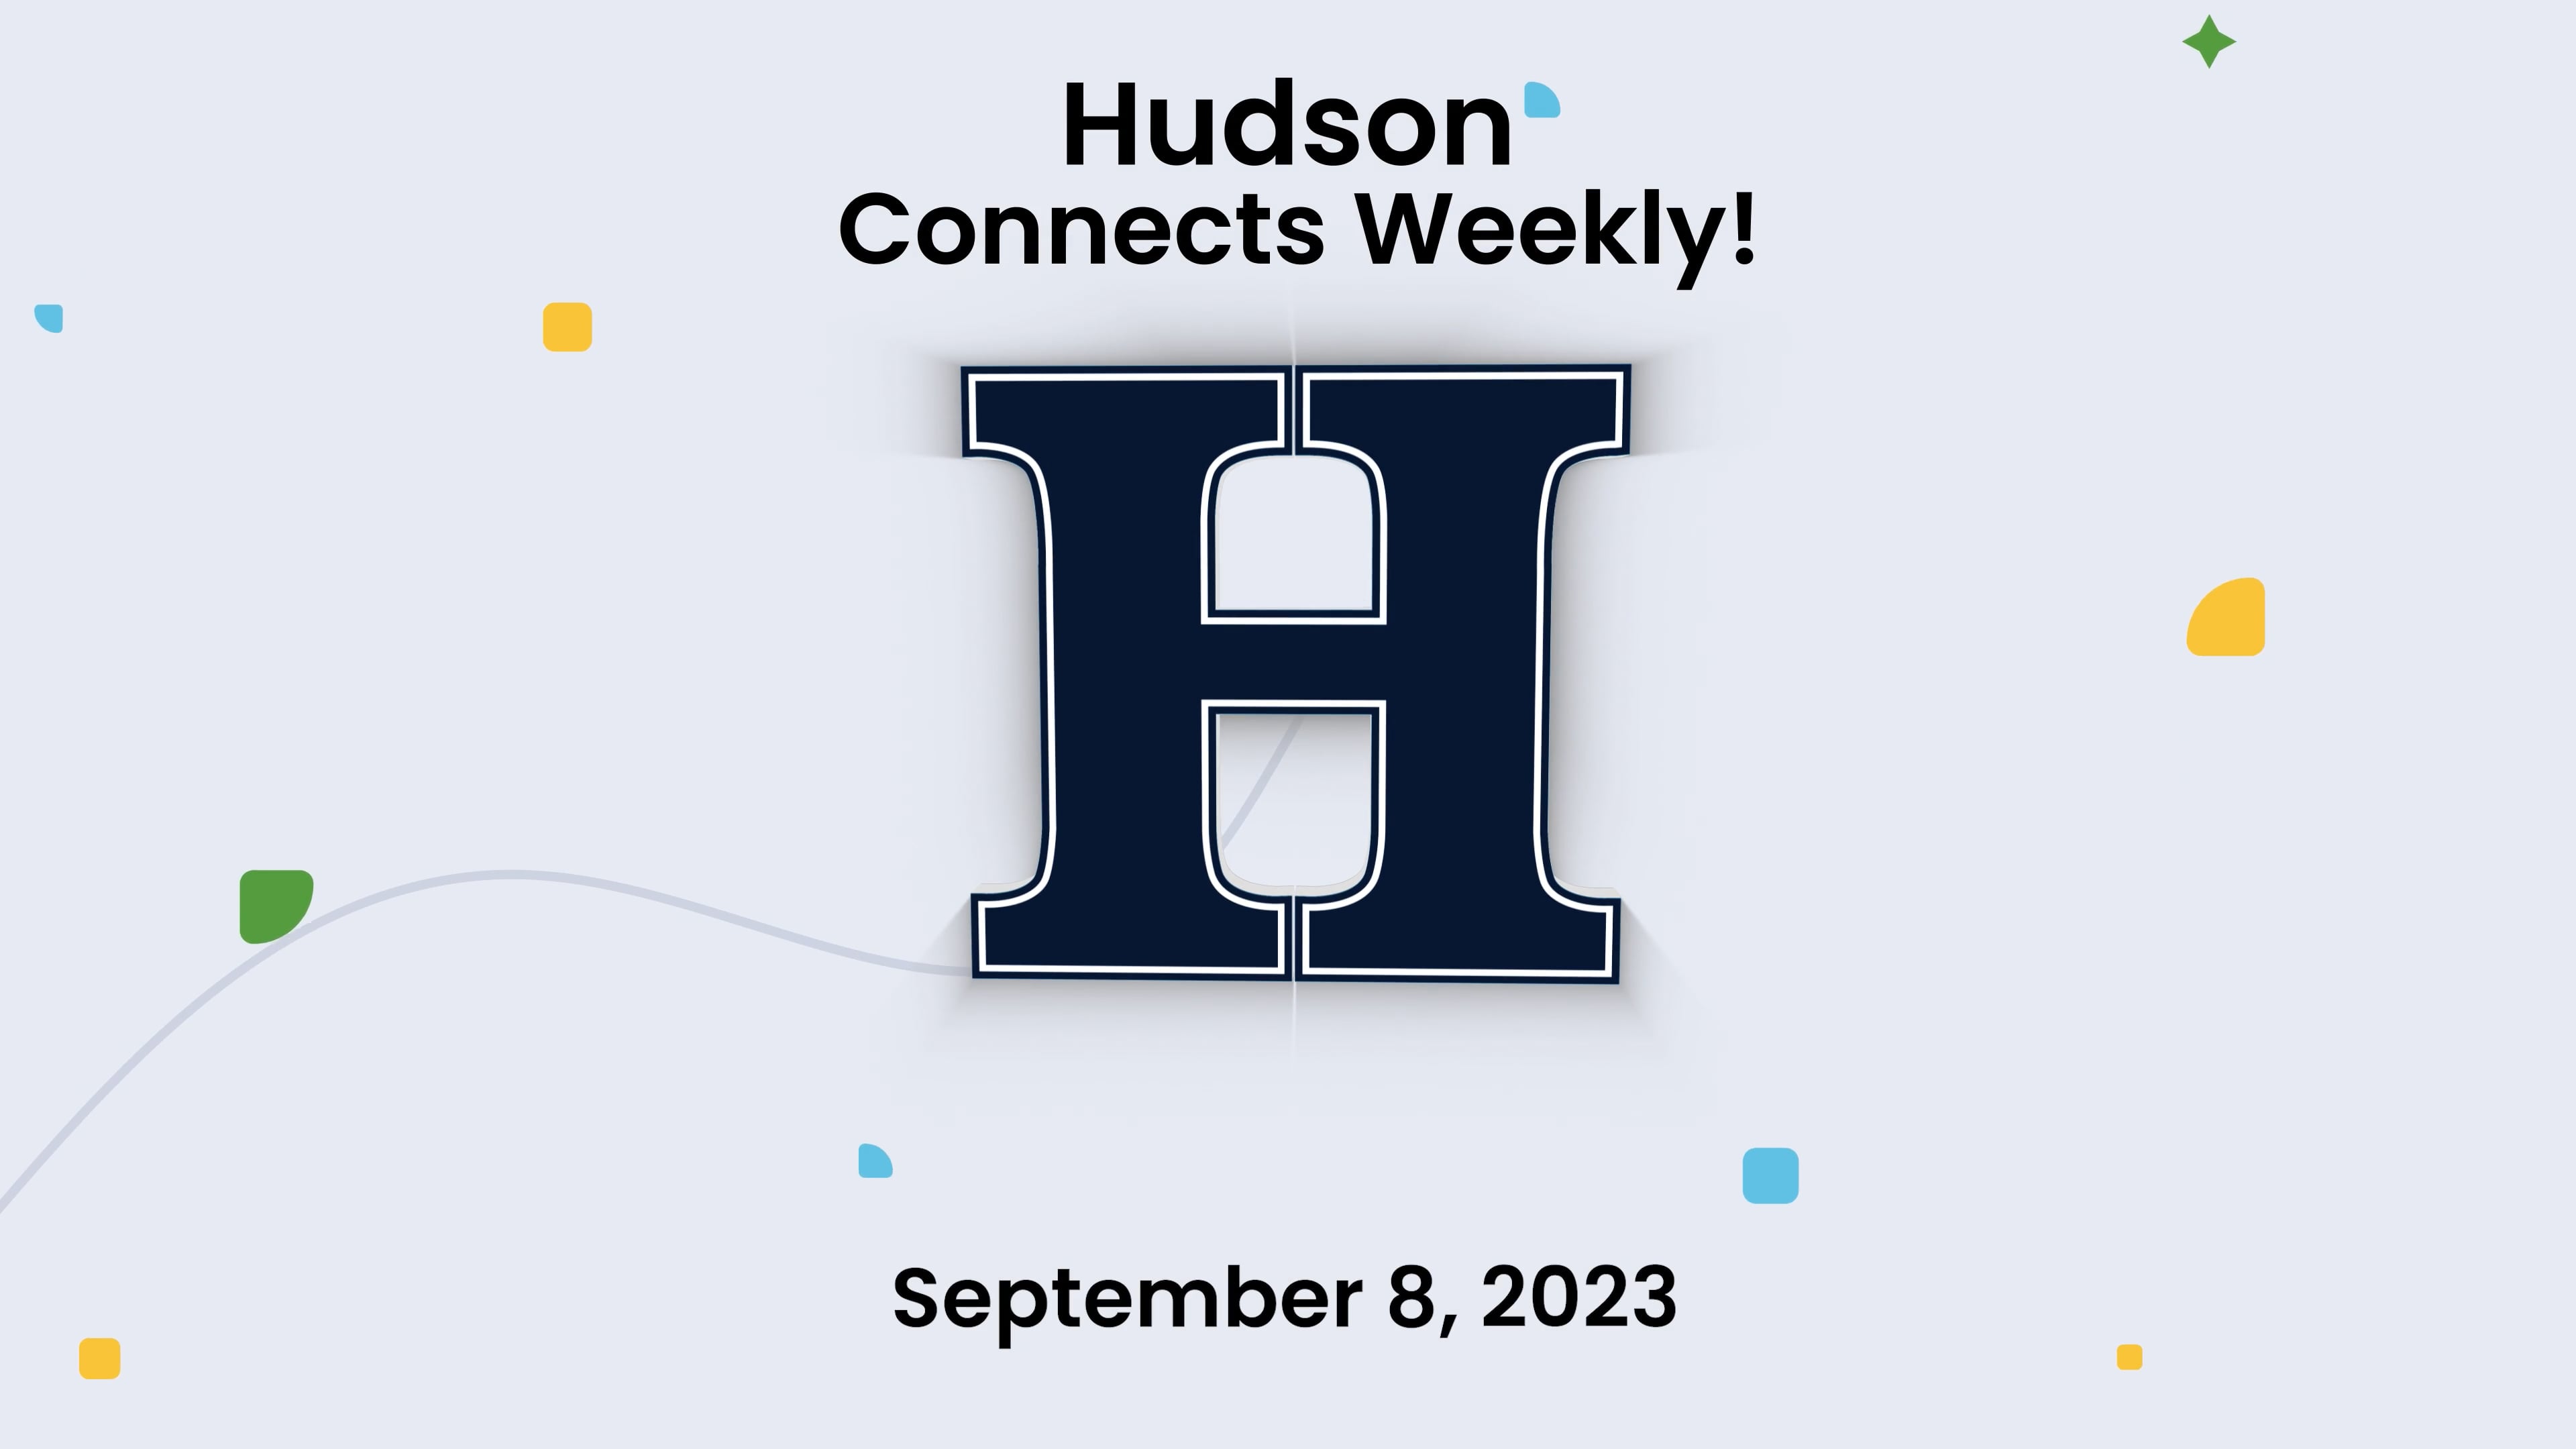 Hudson Connects Weekly - September 8, 2023